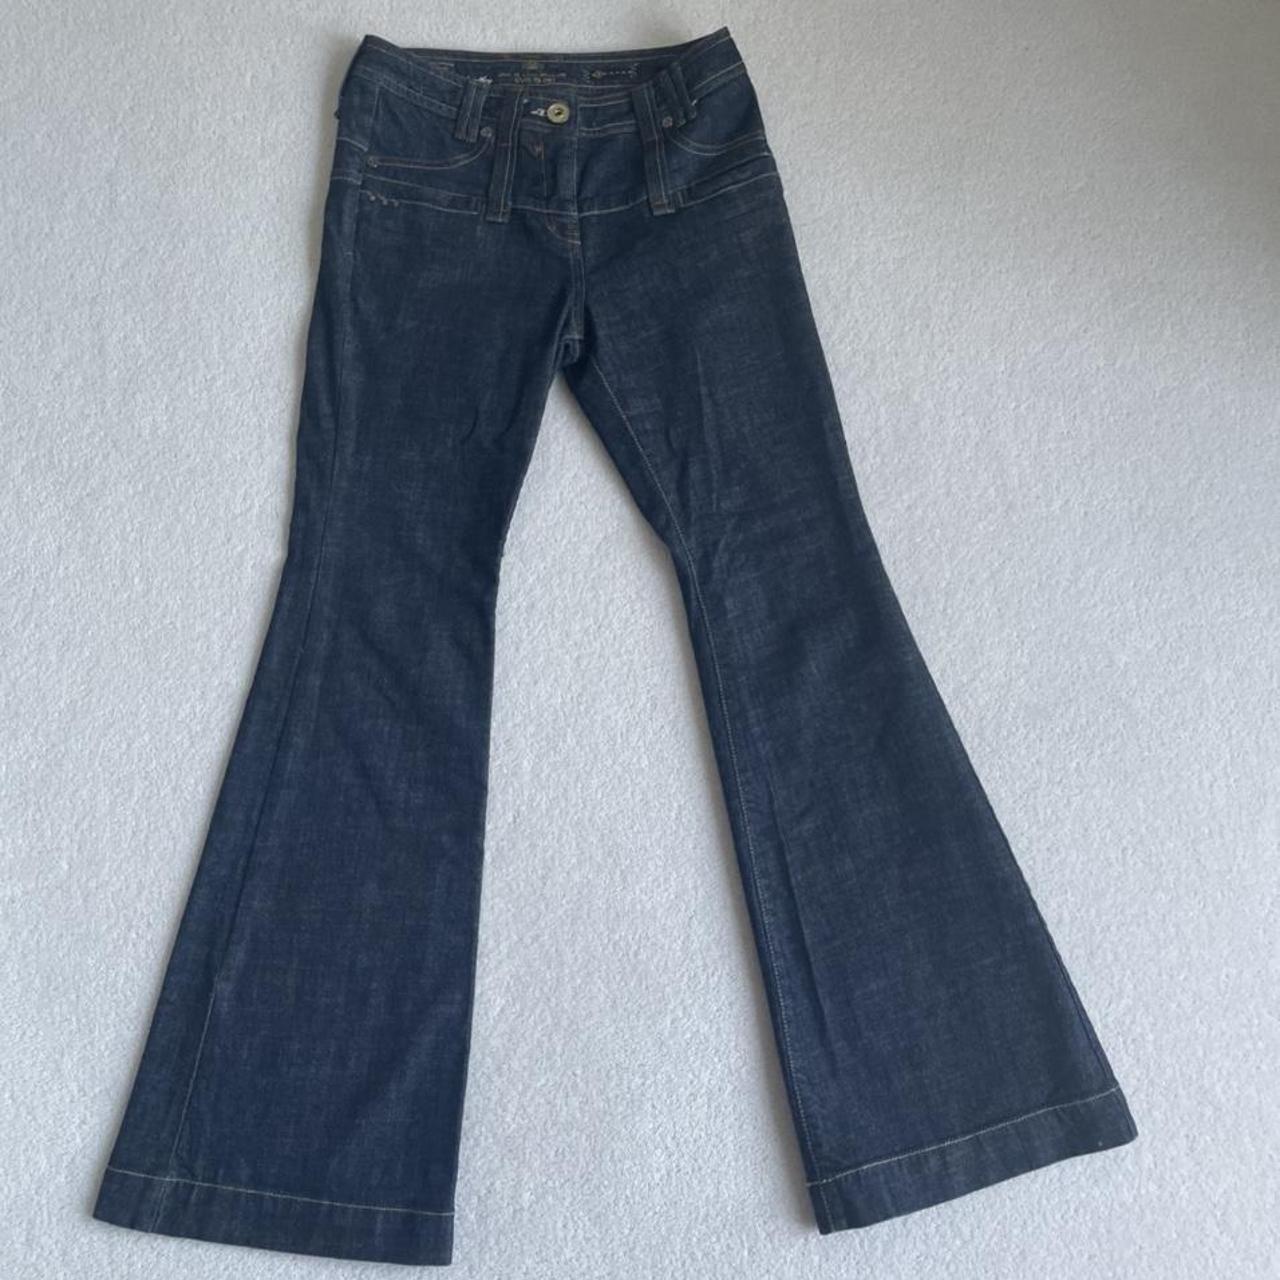 mid to low rise dark blue jeans, label says size 8... - Depop